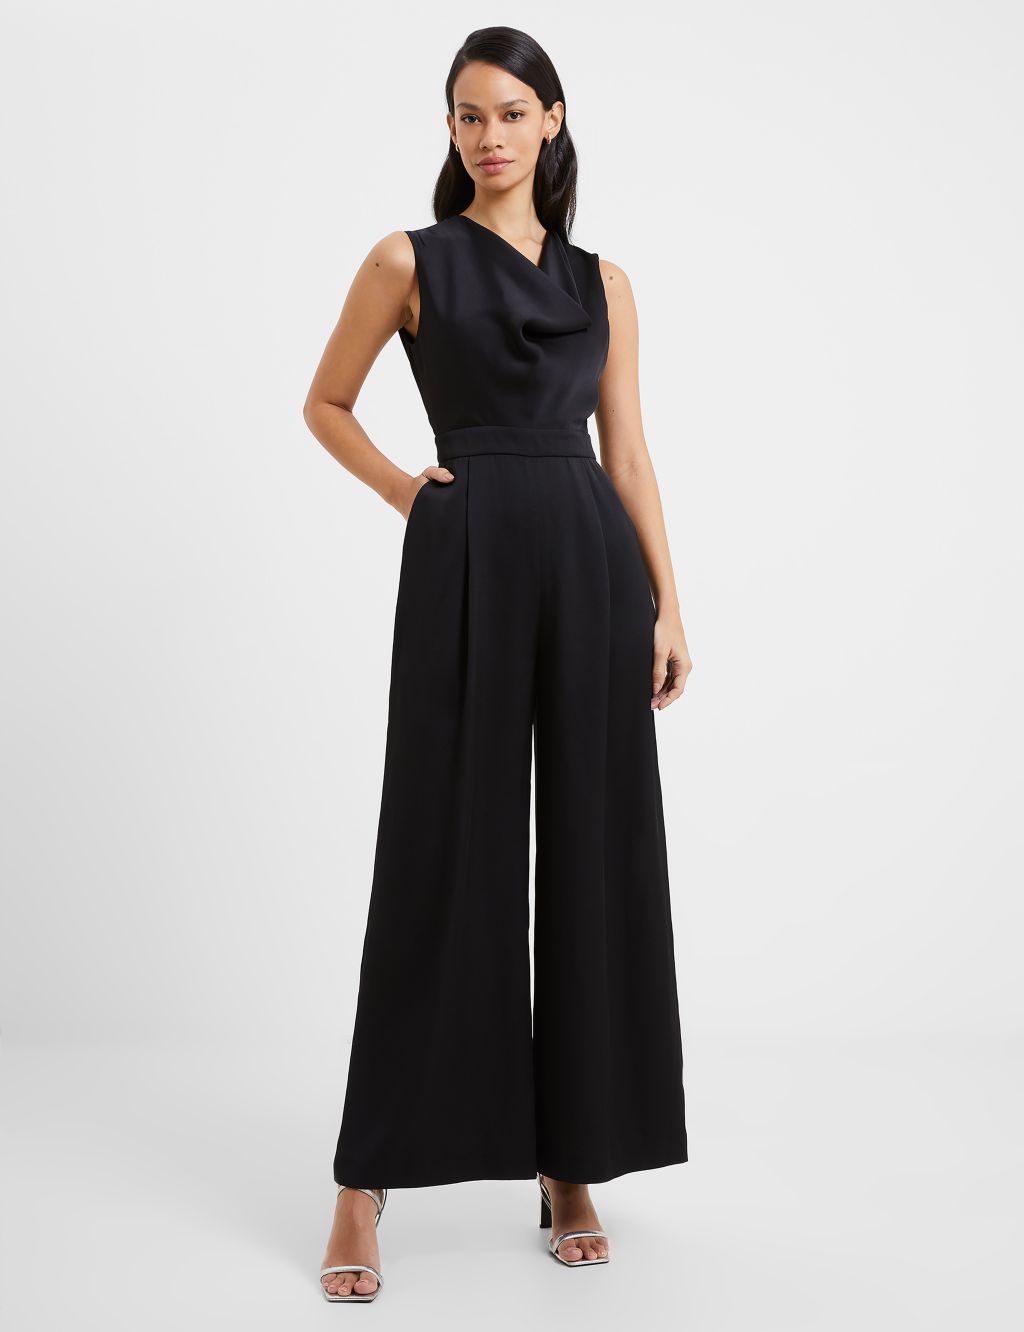 Satin Sleeveless Wide Leg Jumpsuit | French Connection | M&S